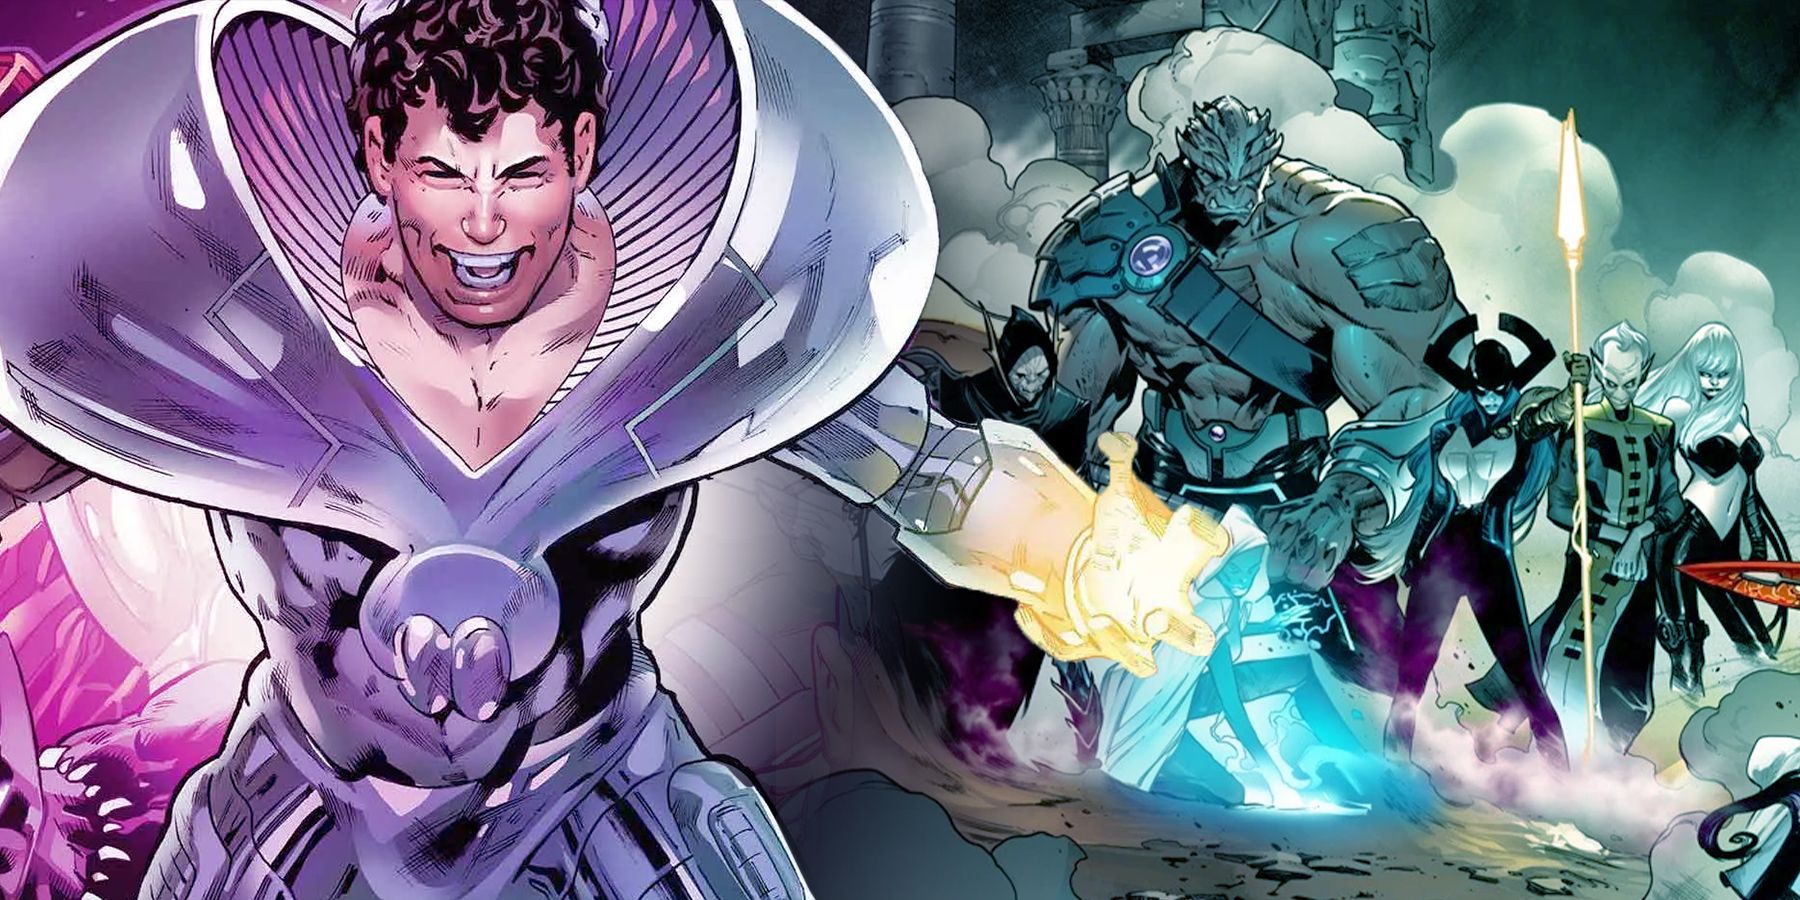 On the left, Beyonder has arms stretched with a menacing smile. On the right, Members of The Black Order stare down solemnly.